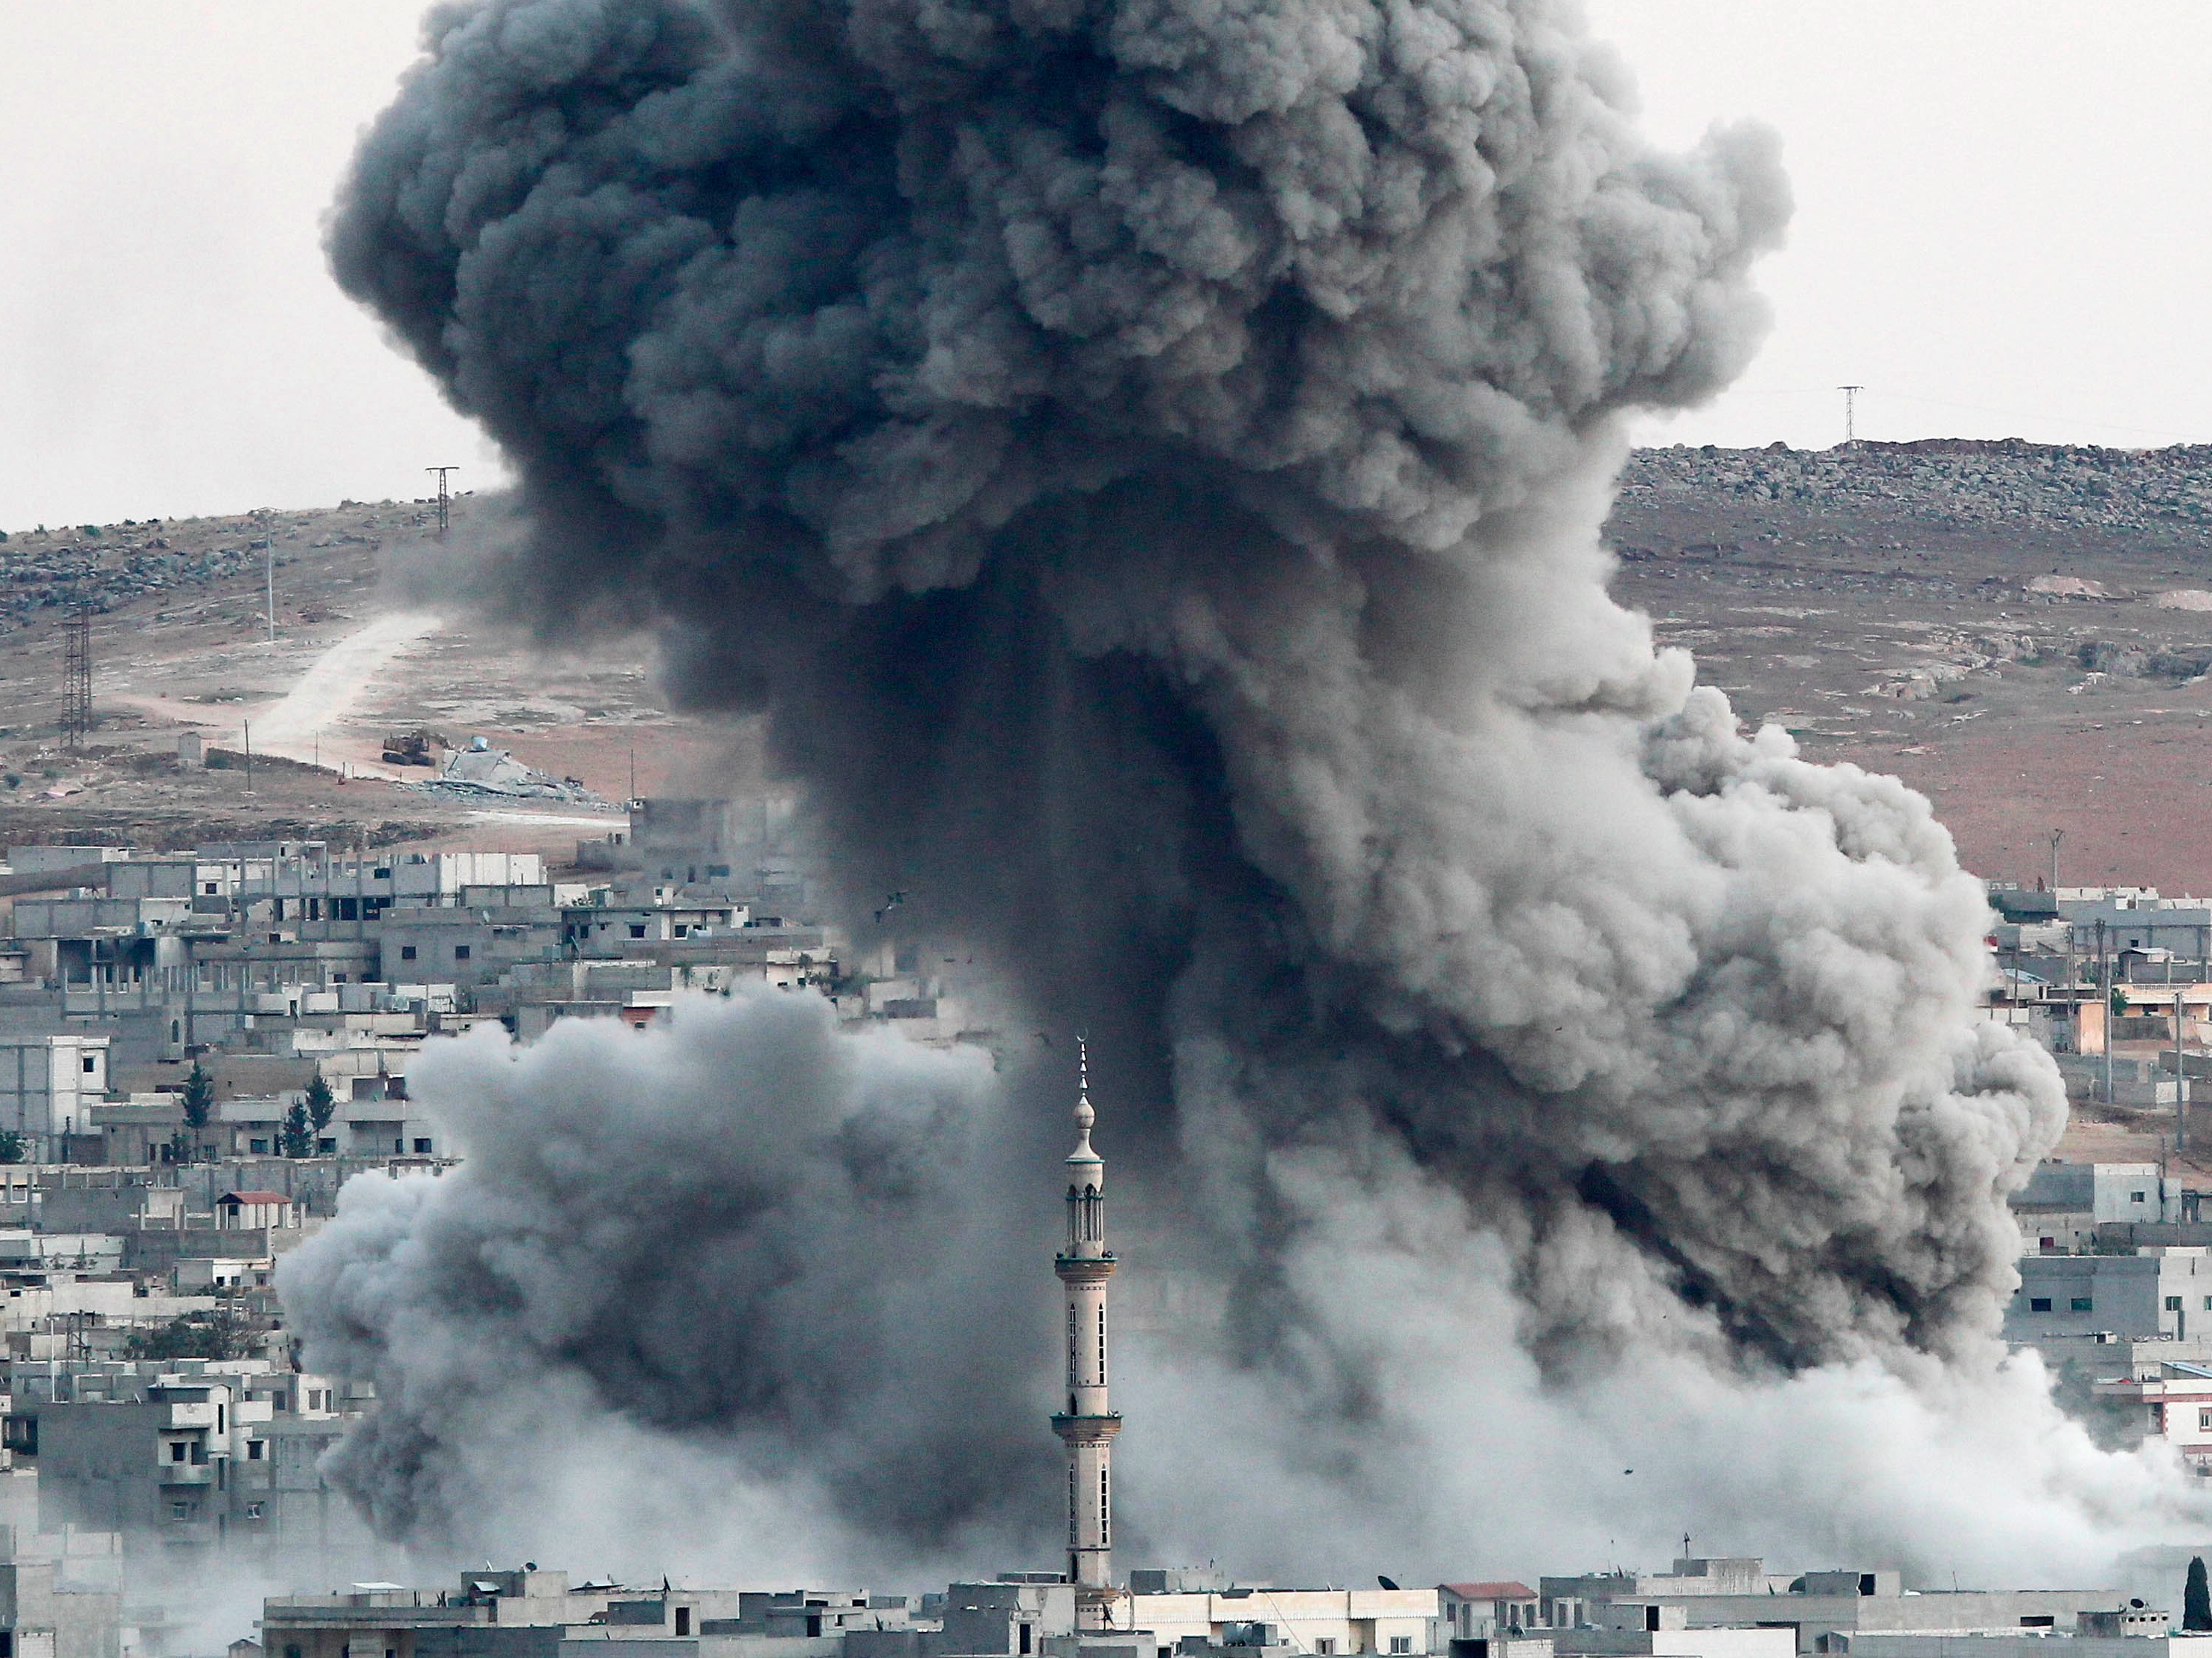 Heavy smoke rises following an airstrike by the US-led coalition aircraft in Kobani, Syria, during fighting between Syrian Kurds and the militants of Islamic State group, as seen from the outskirts of Suruc, on the Turkey-Syria border, October 18, 2014.